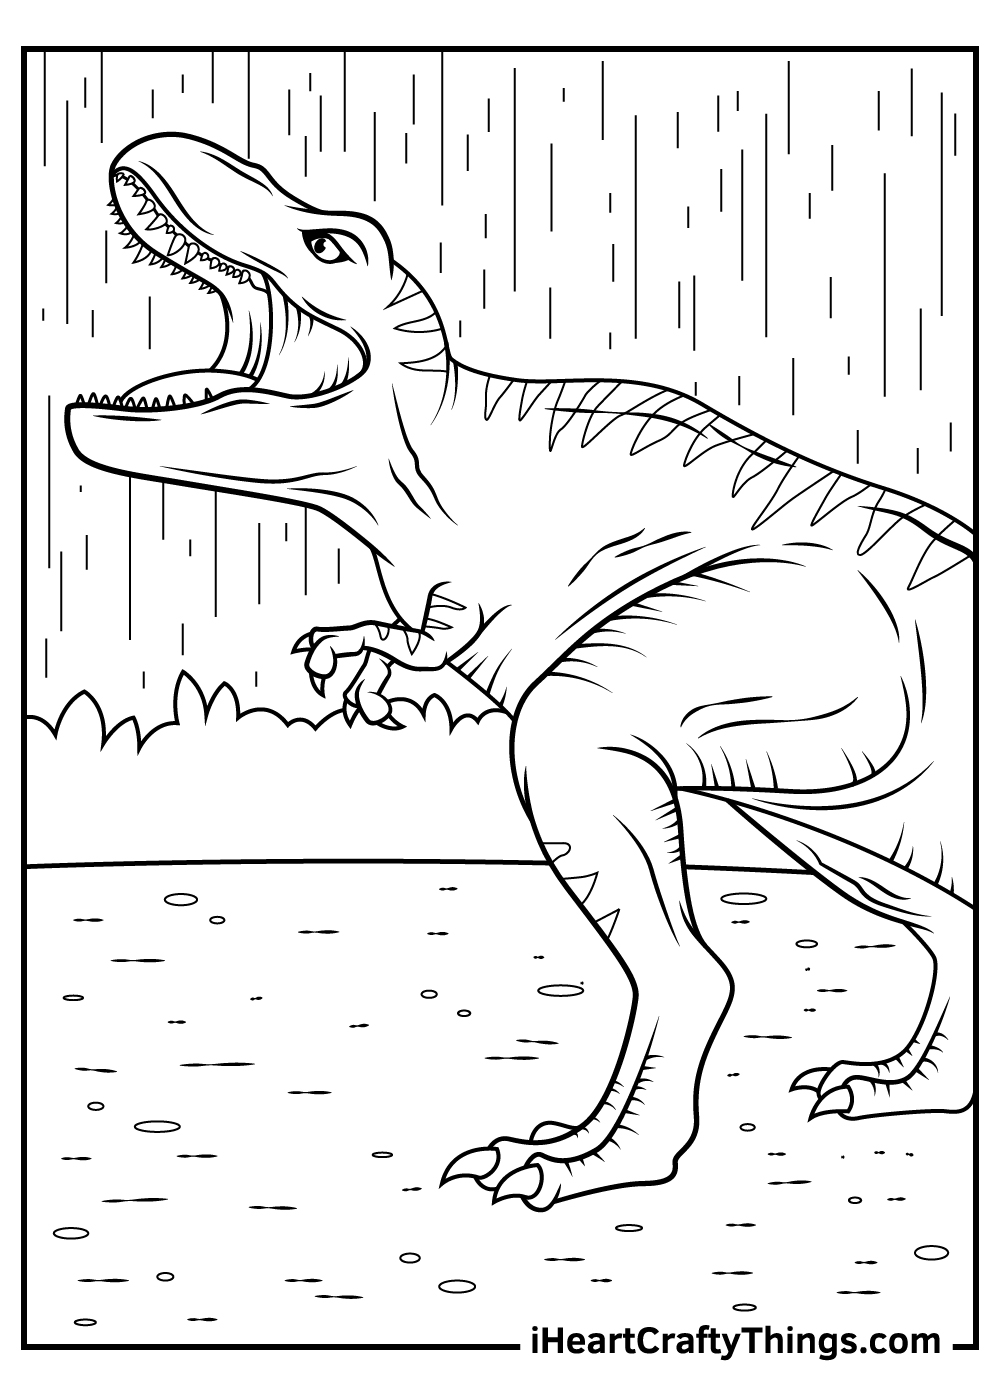 Printable Jurassic Park Coloring Pages Updated 2021